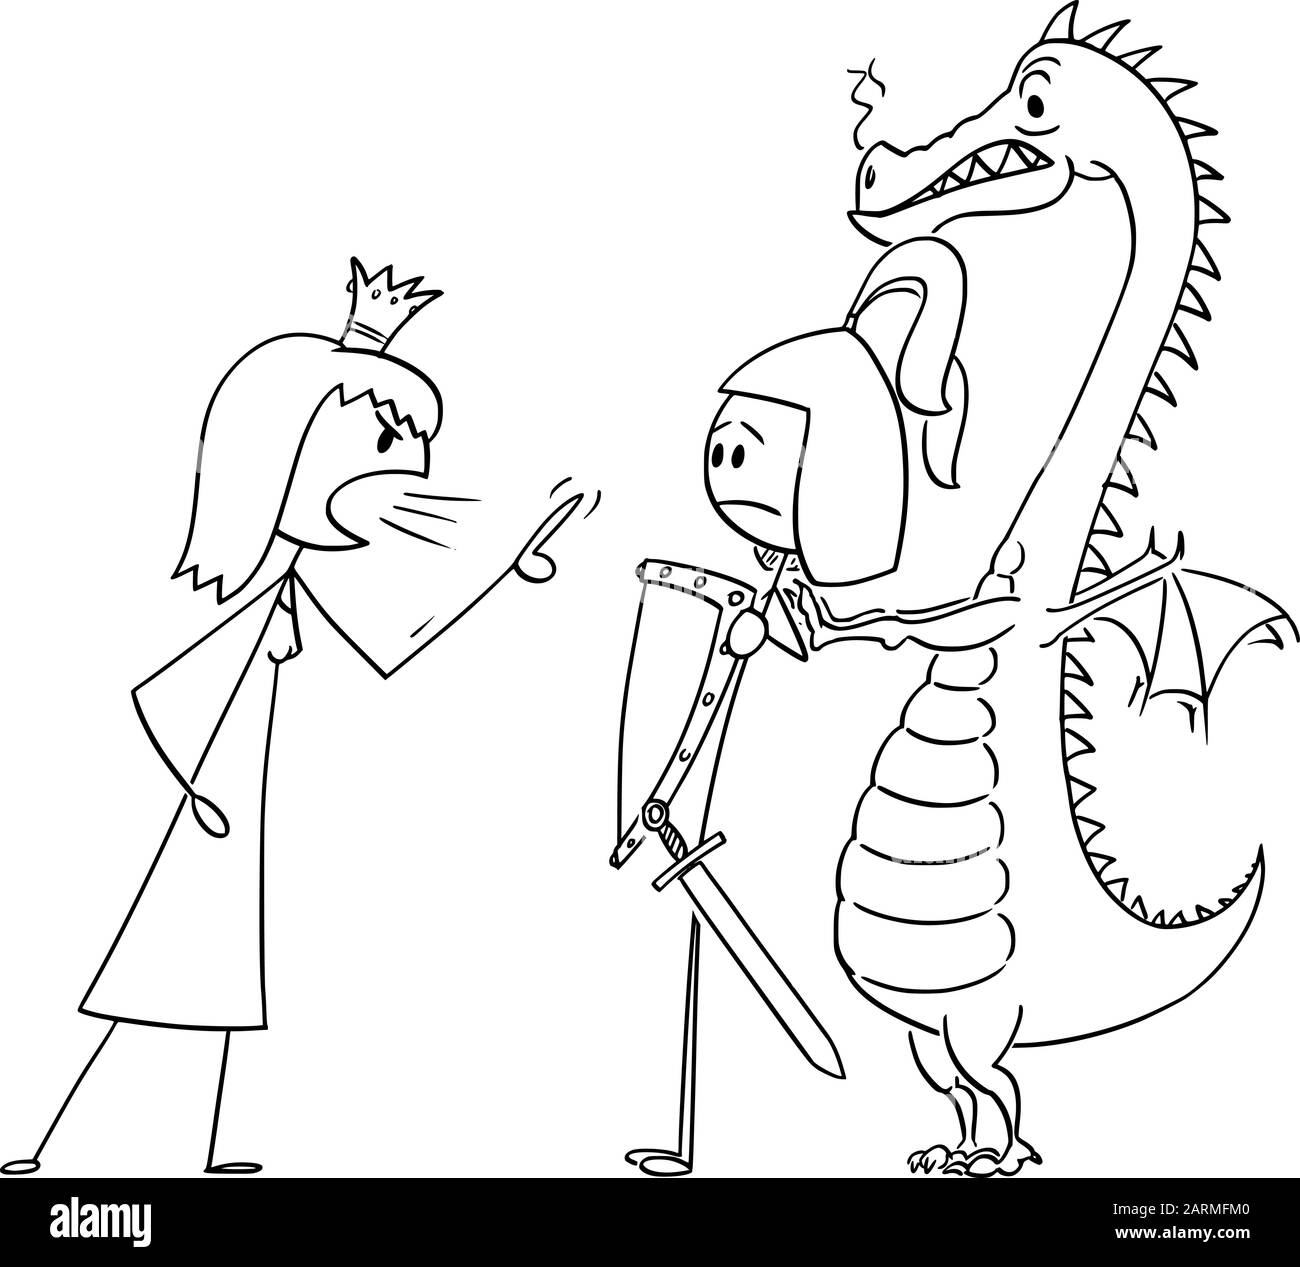 Vector cartoon stick figure drawing conceptual illustration of princess or queen yelling angry at prince or warrior in armor and dragon. Concept of relationship problem. Stock Vector